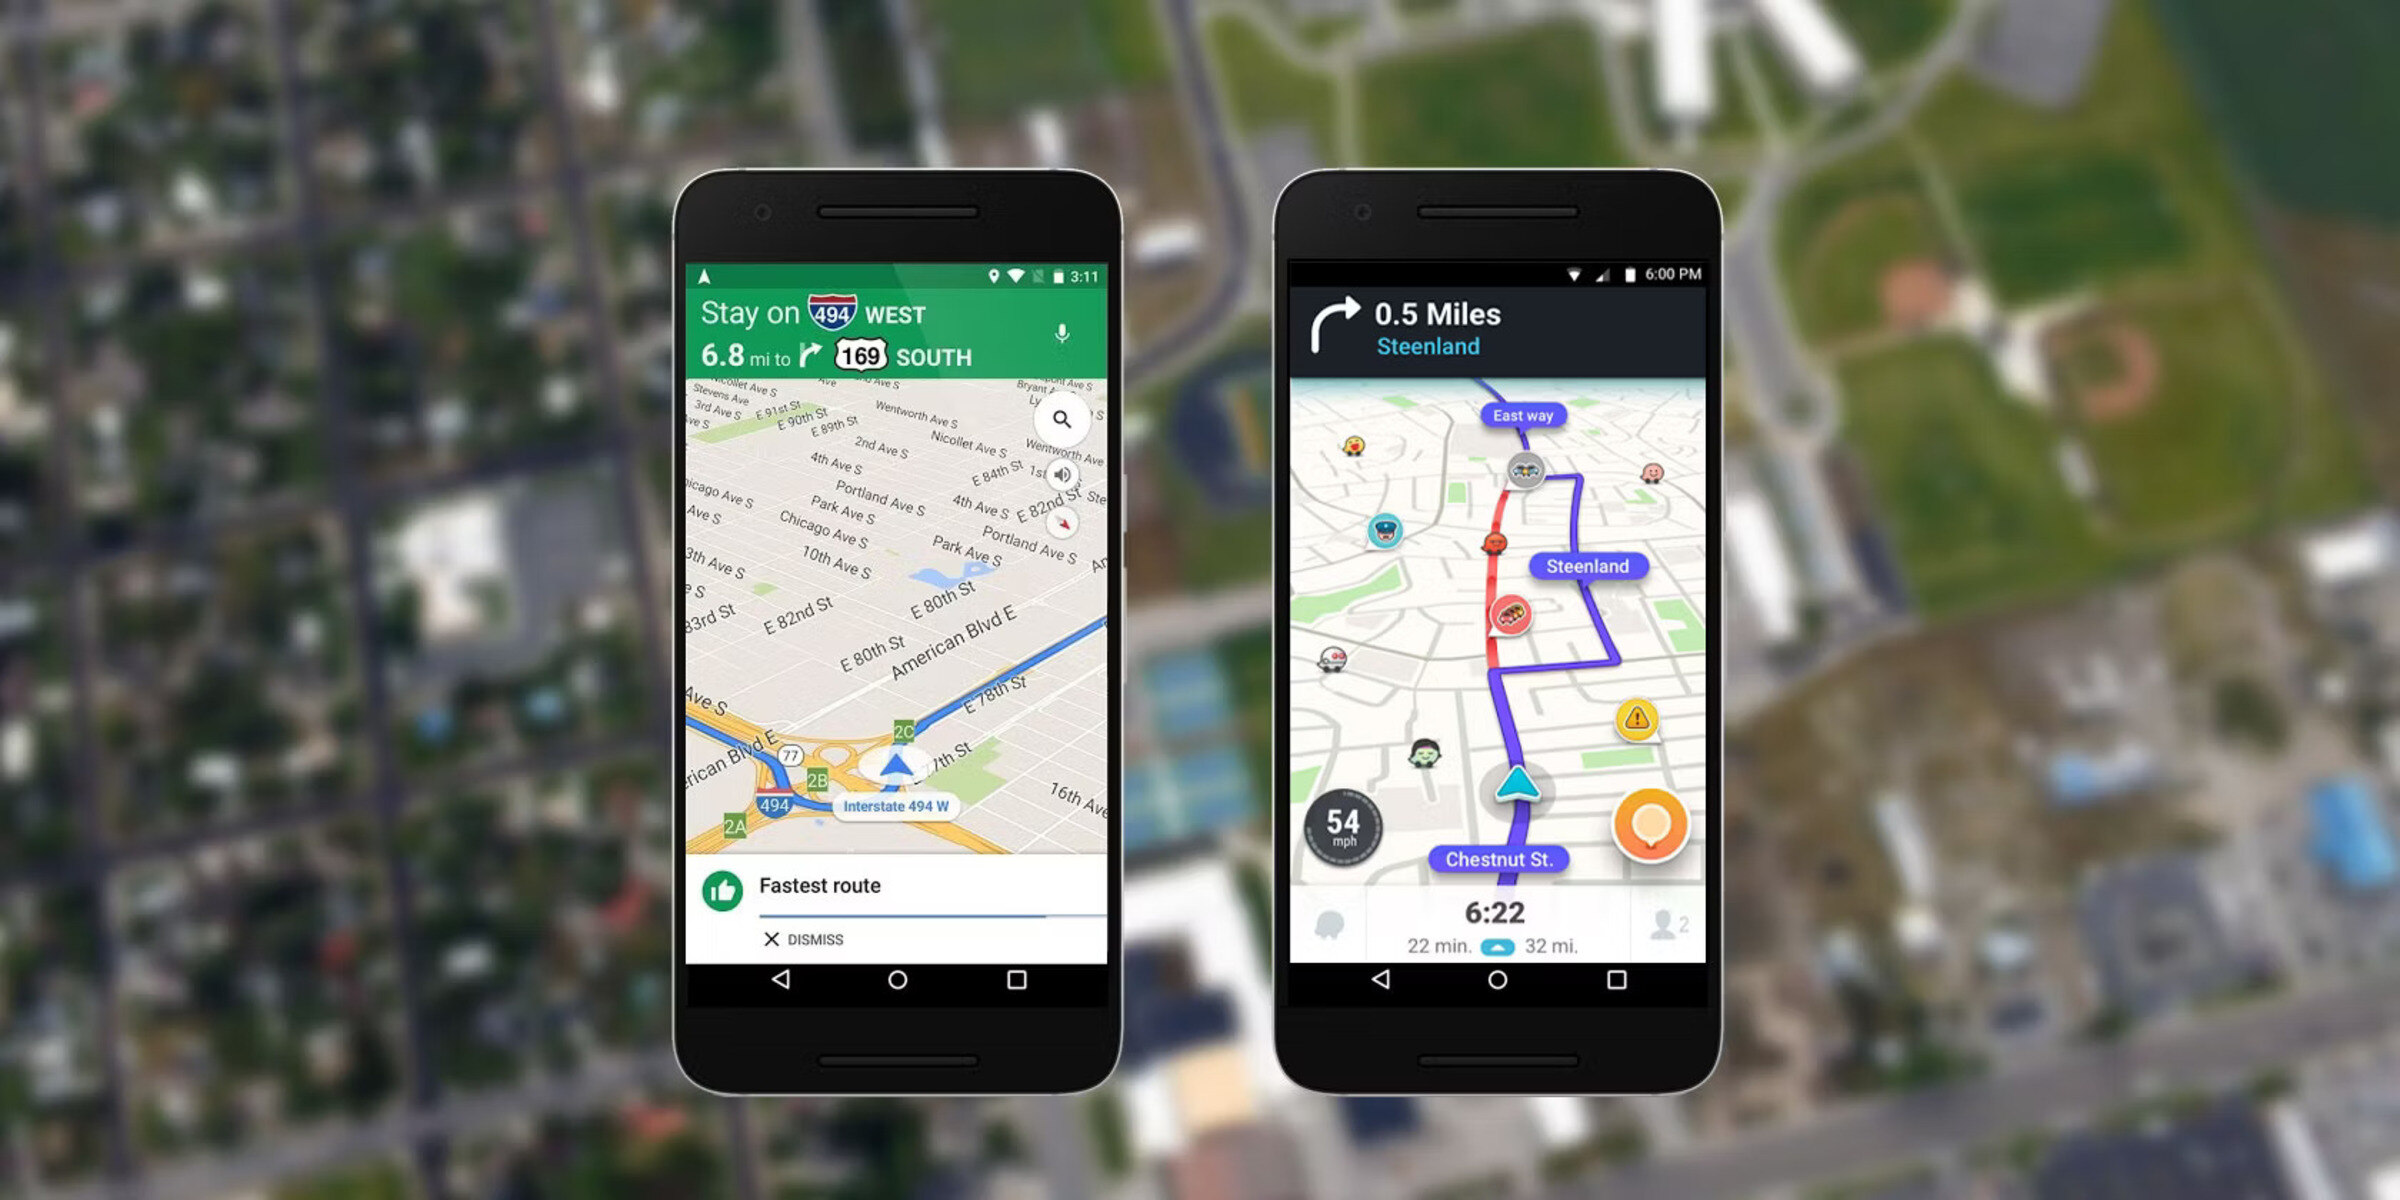 Waze Vs. Google Maps: What’s The Difference?